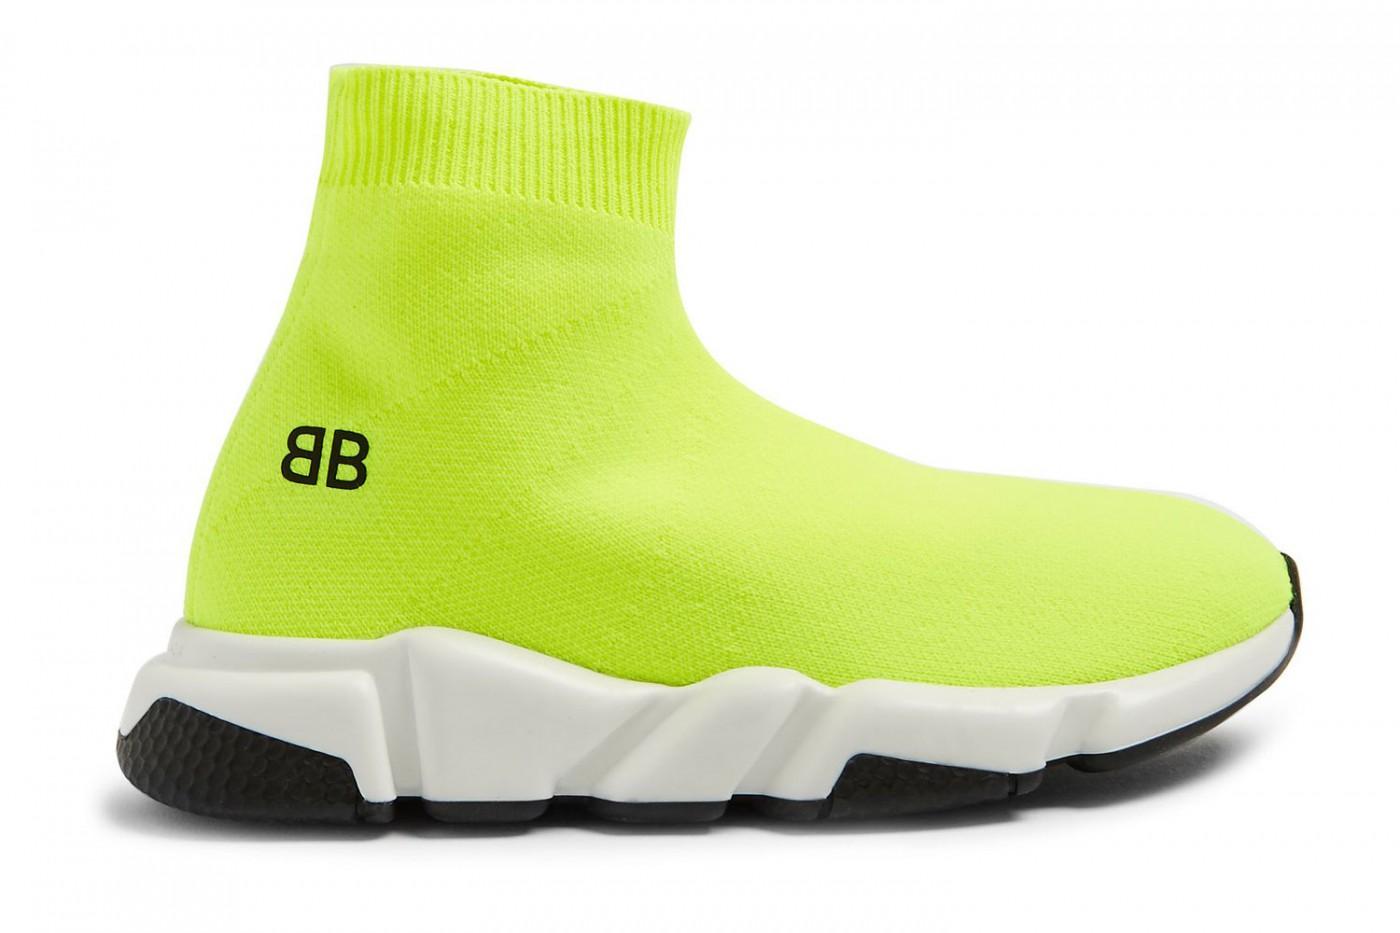 Balenciaga's Kids Shoes Are Here And They Cost $295